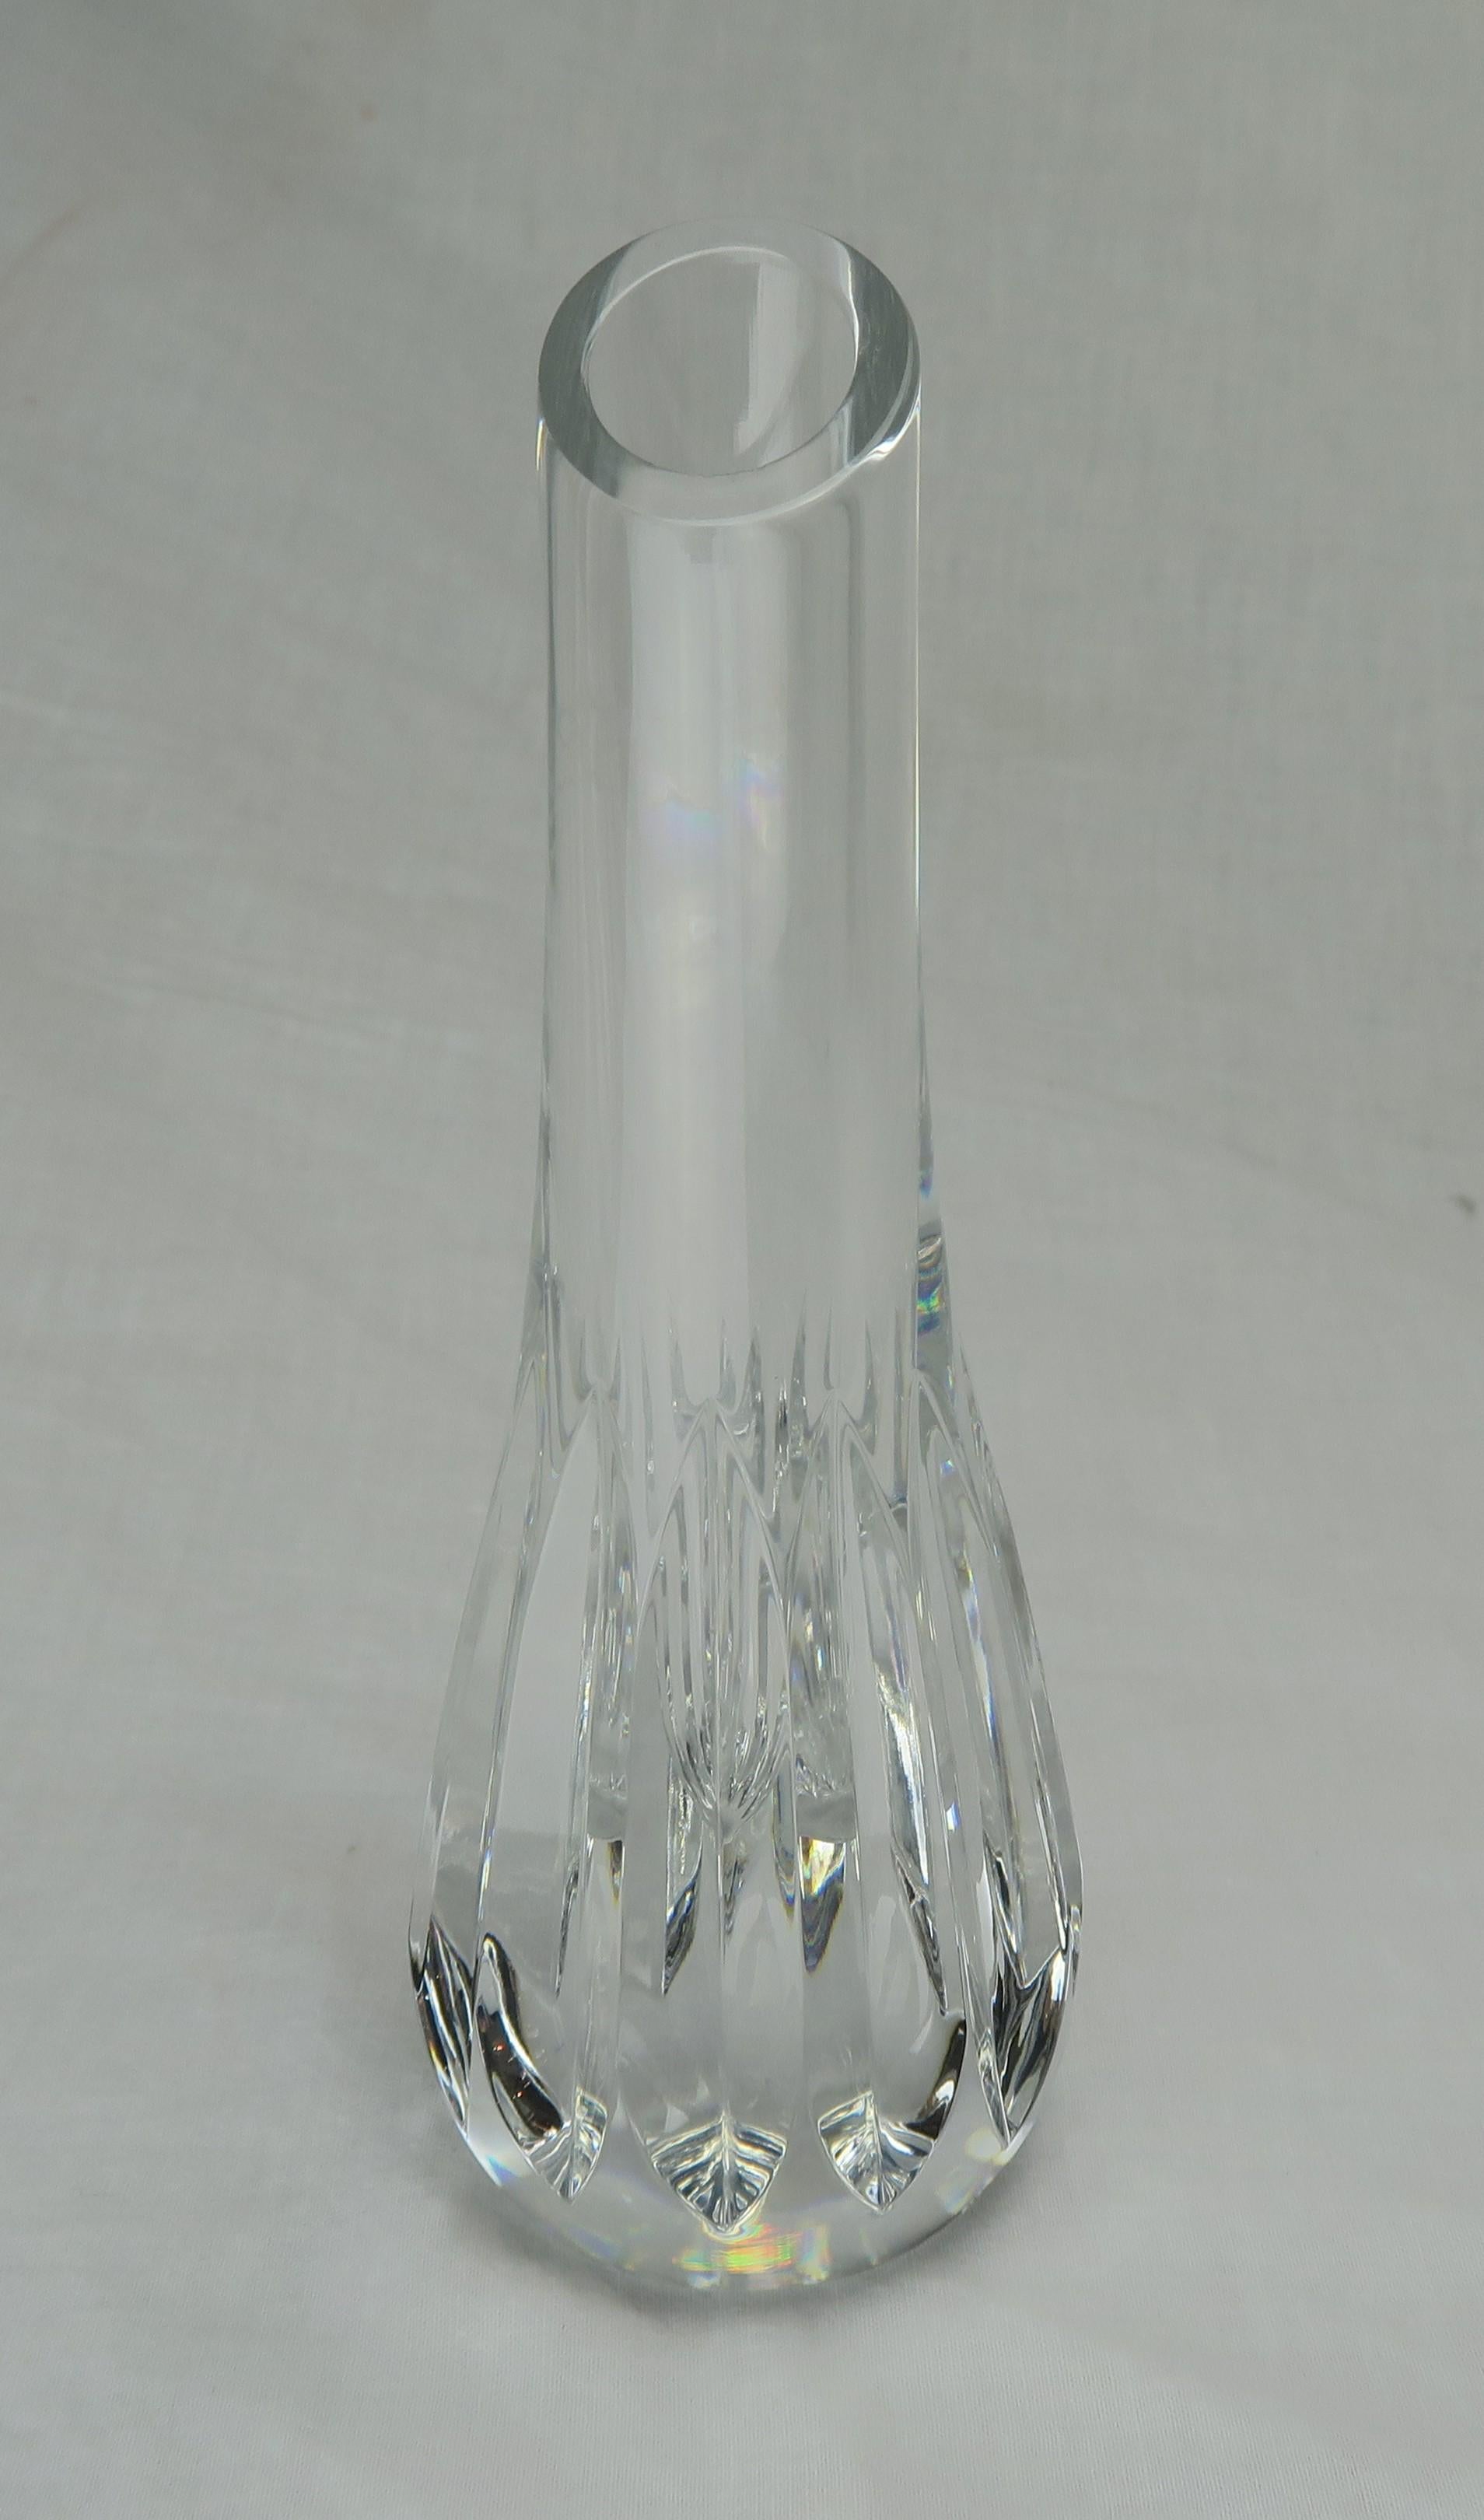 Baccarat cut crystal bud vase with 